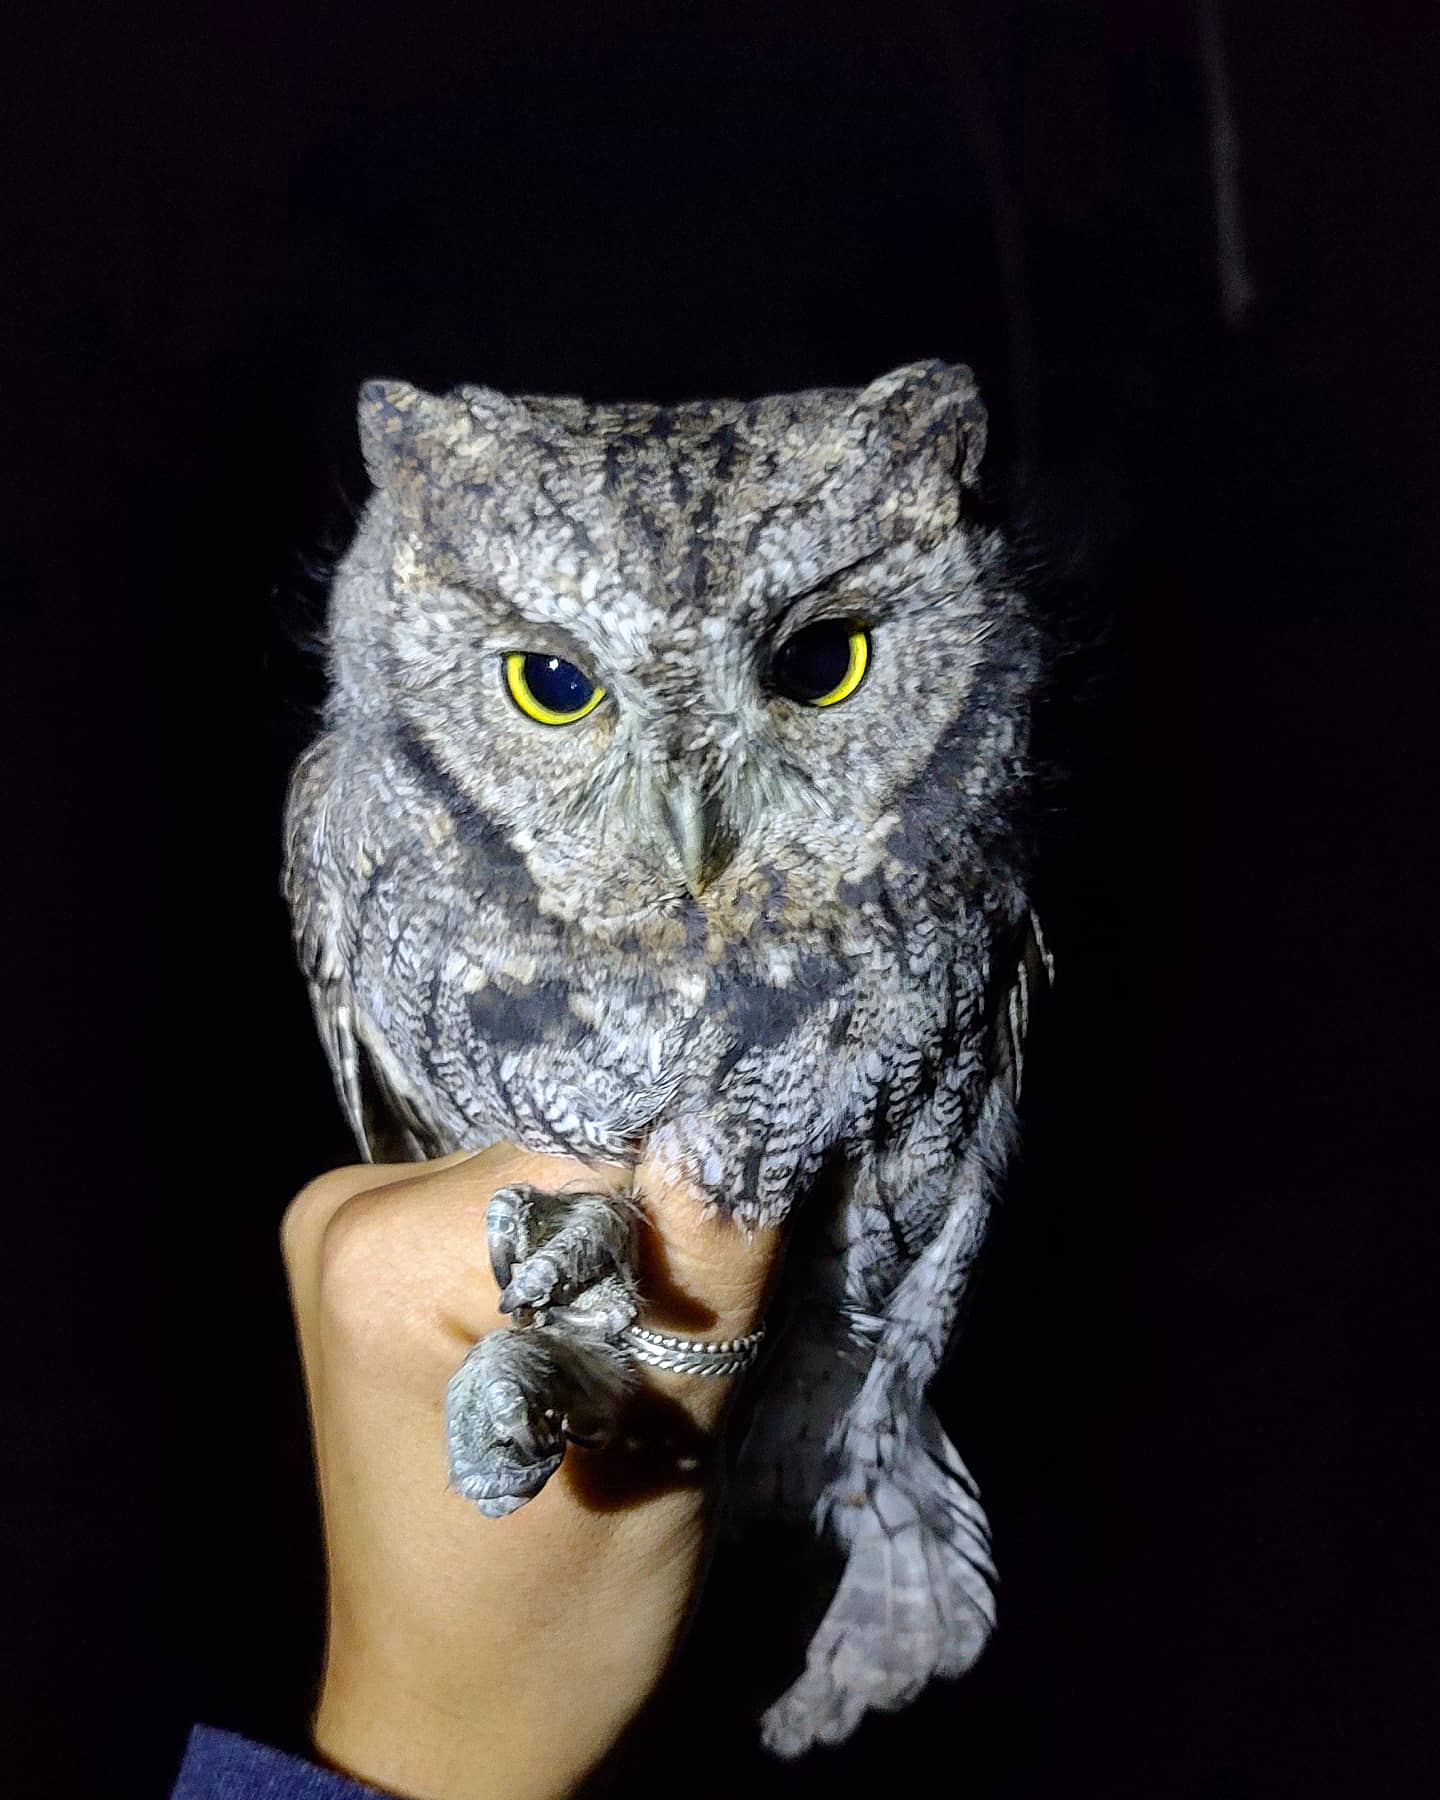 a streaked gray owl looks grumpily at the camera. It's feet are held carefully by a biologist